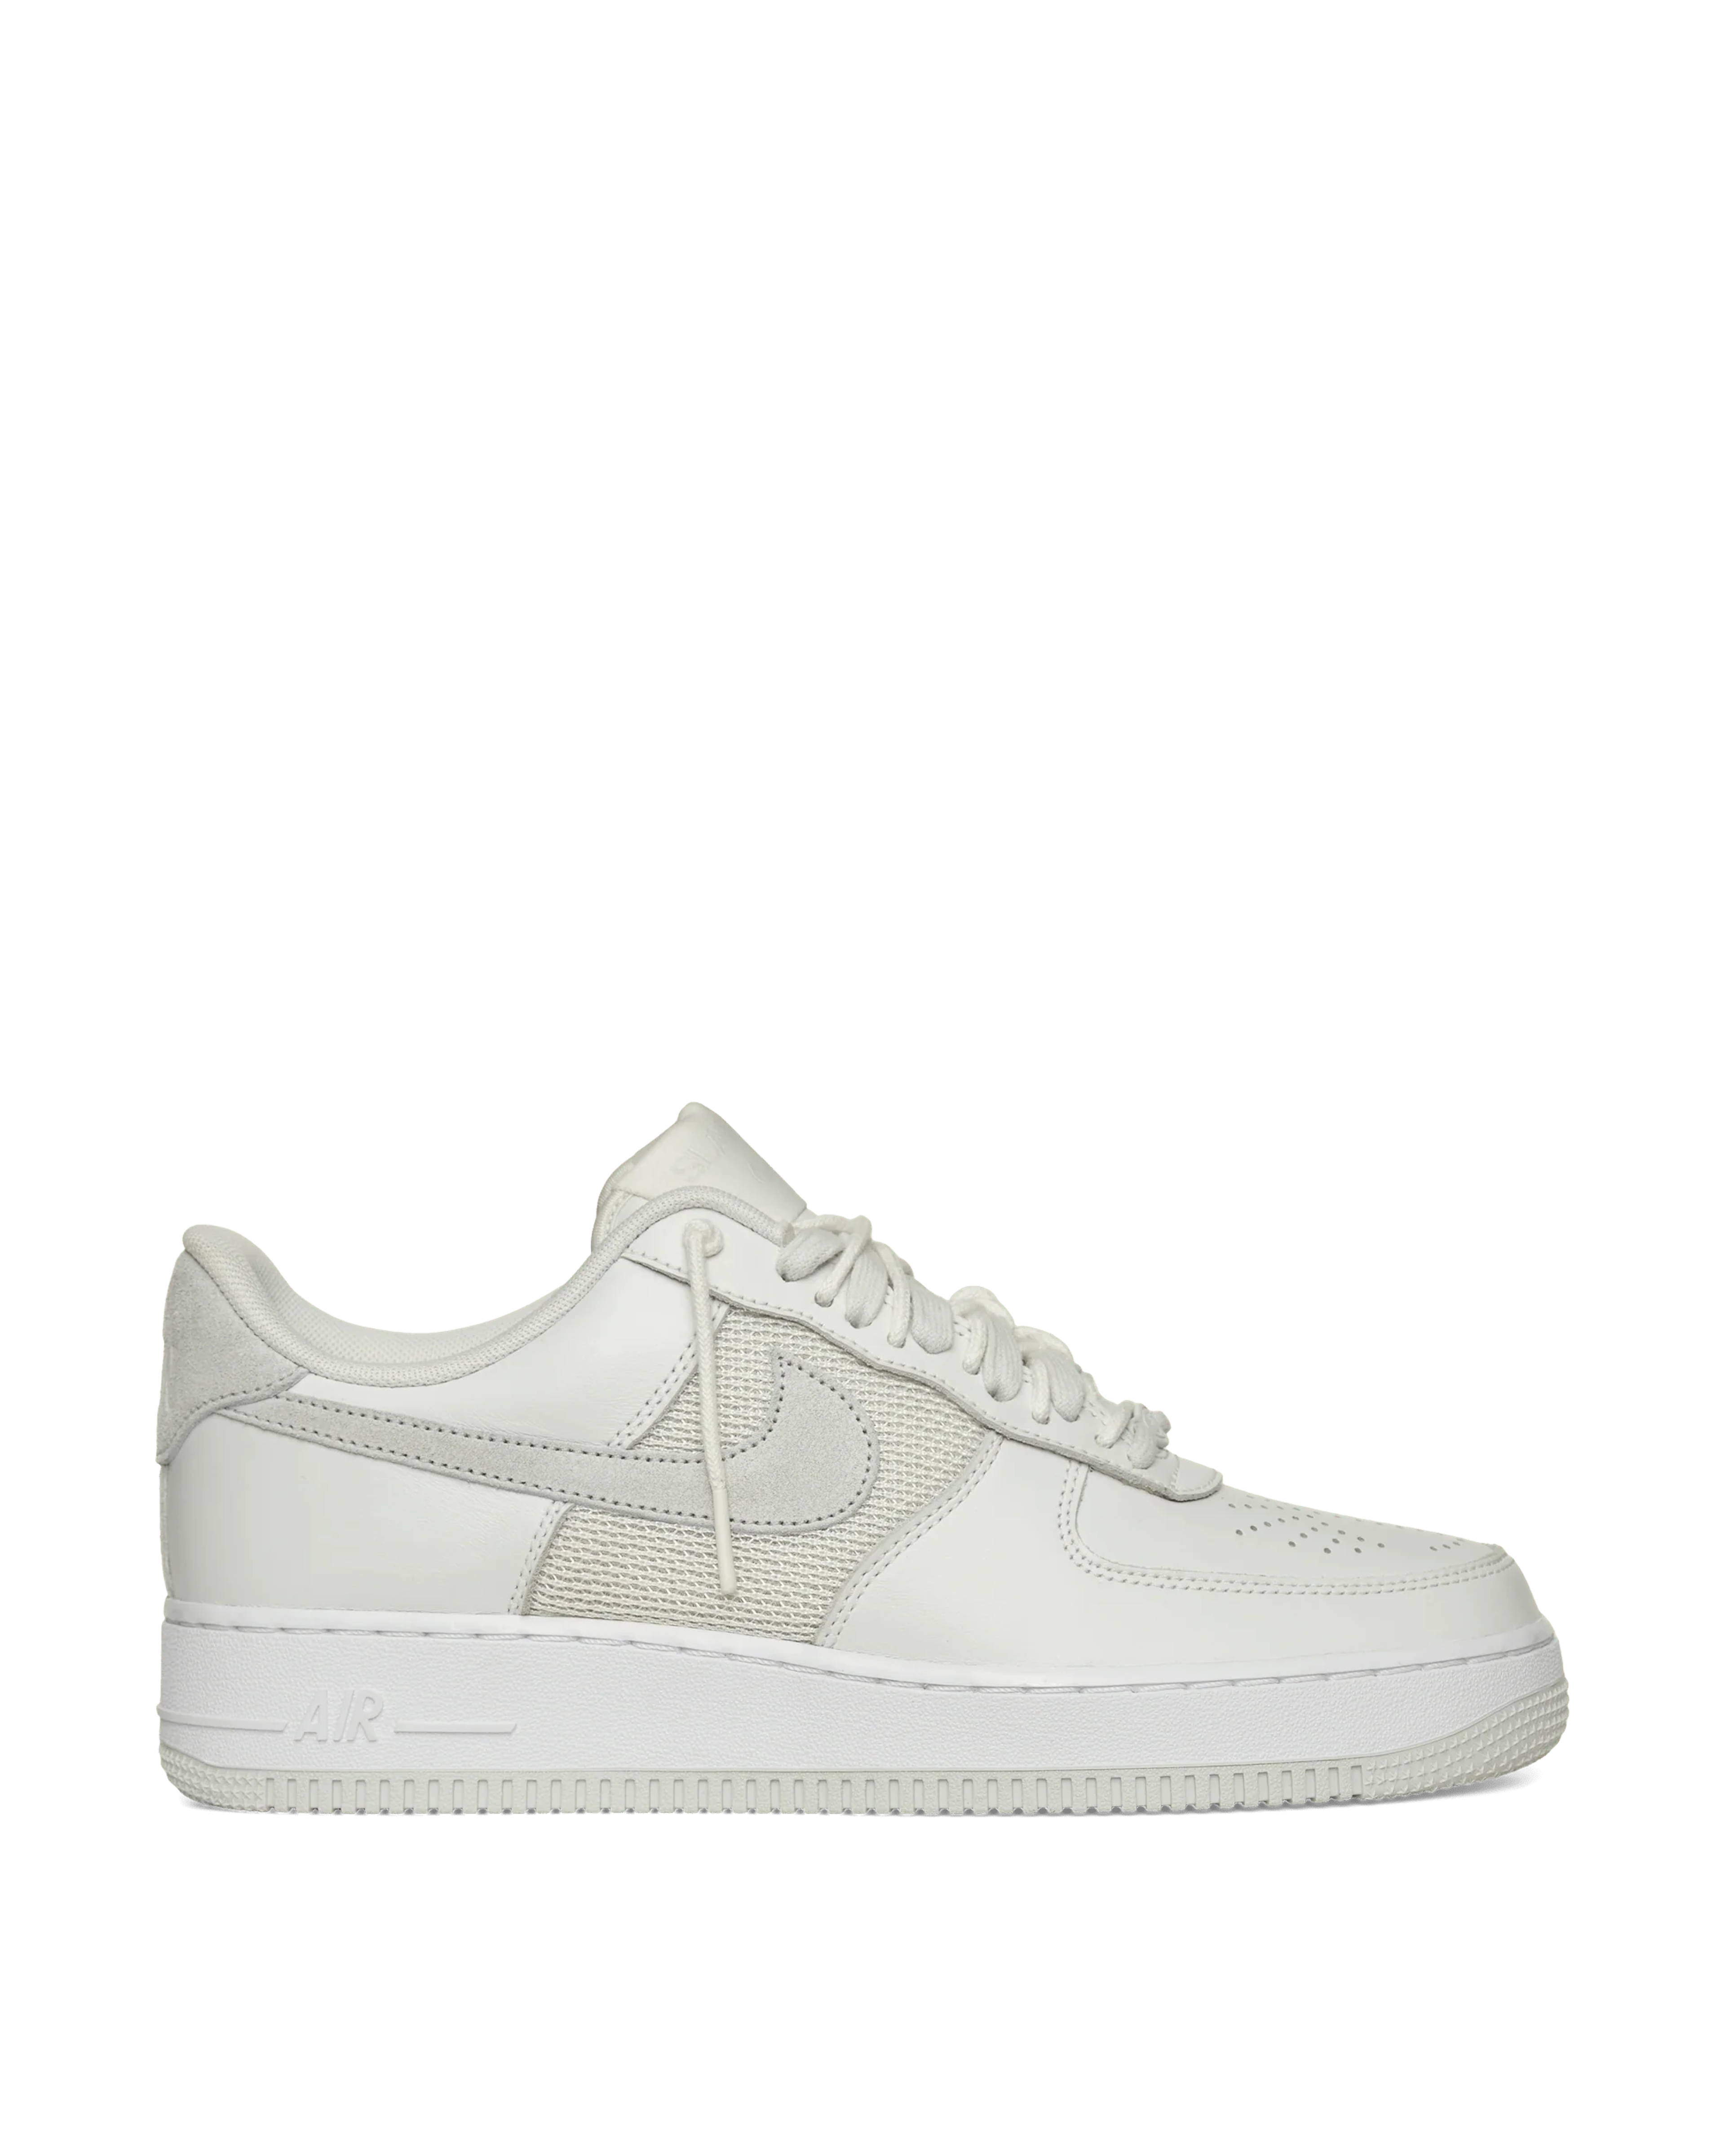 Slam Jam Air Force 1 Low SP Sneakers White - 10 / White